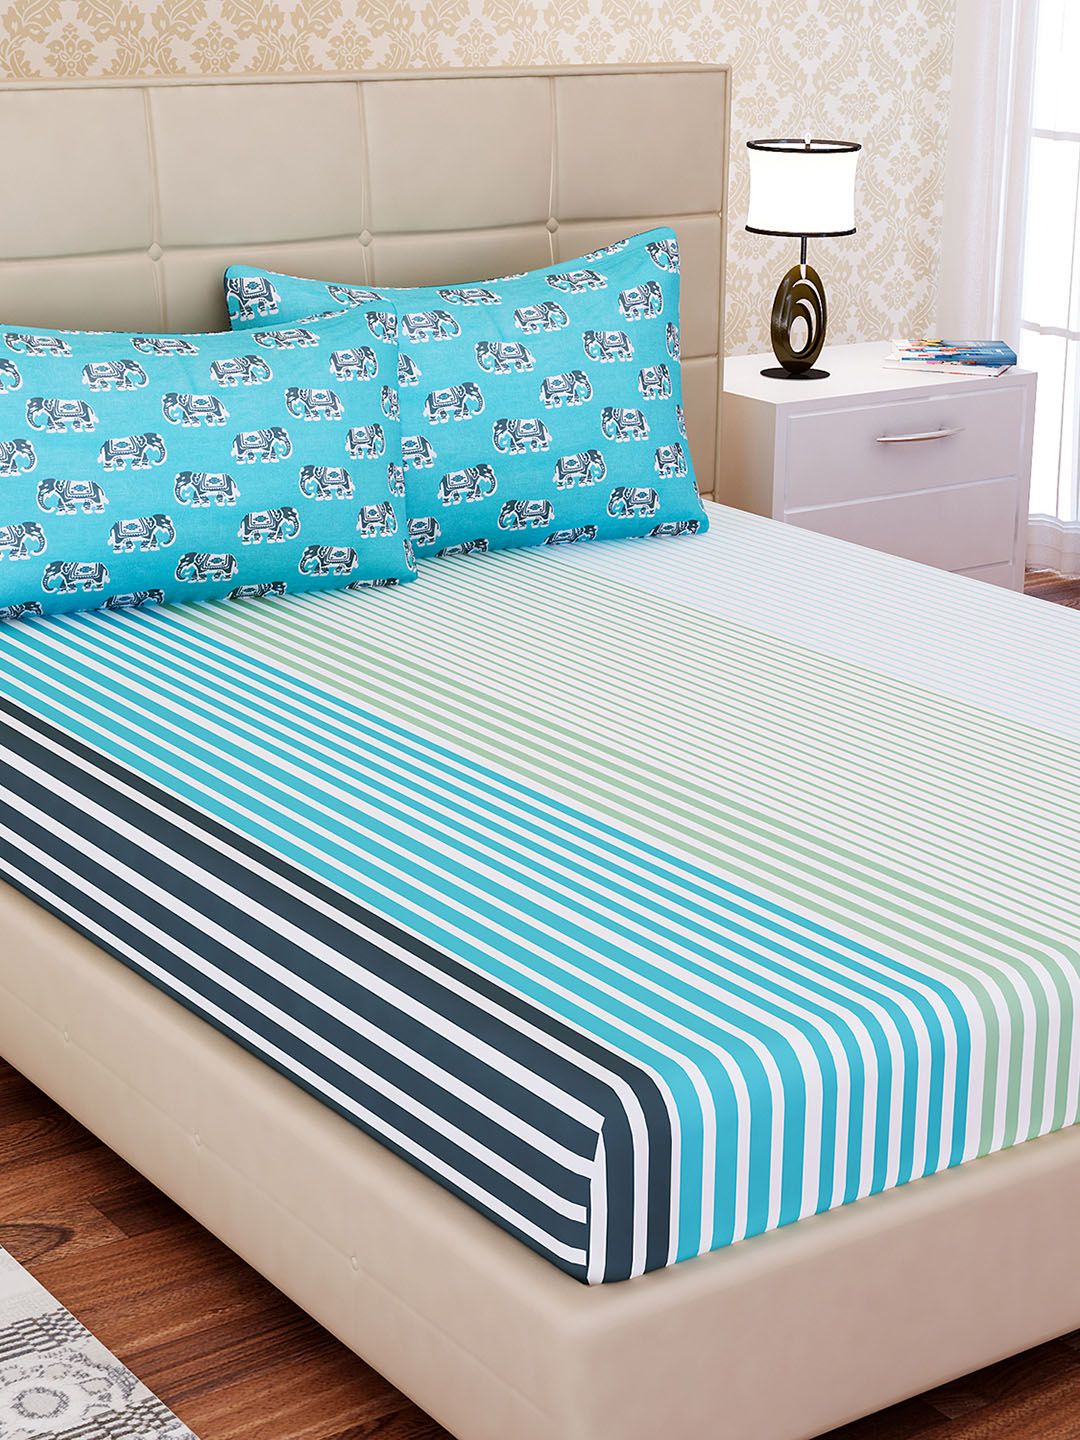 SEJ by Nisha Gupta Blue & Green Flat 144 TC Cotton Double Bedsheet with 2 Pillow Covers Price in India